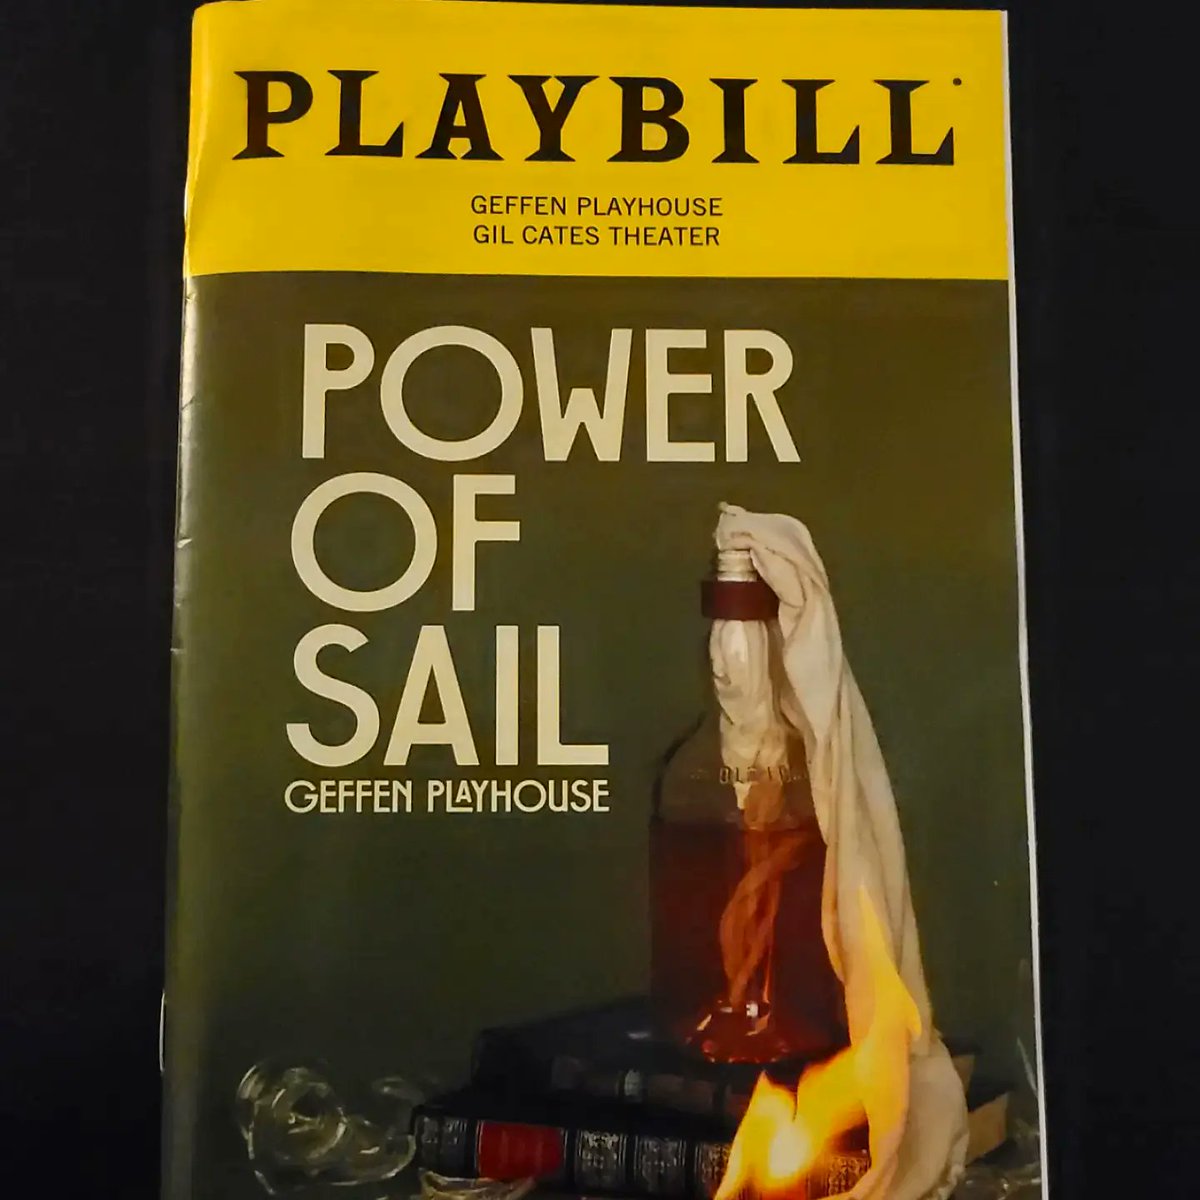 Grateful to have seen 'Power of Sail' Relevant, powerful and entertaining. Incredible cast, including @BryanCranston @BrandonOScott @AmyBrenneman Playwright @paulgrellong and Director Weyni Mengesha. Go see it if you have the chance! #powerofsail #play #theater @GeffenPlayhouse